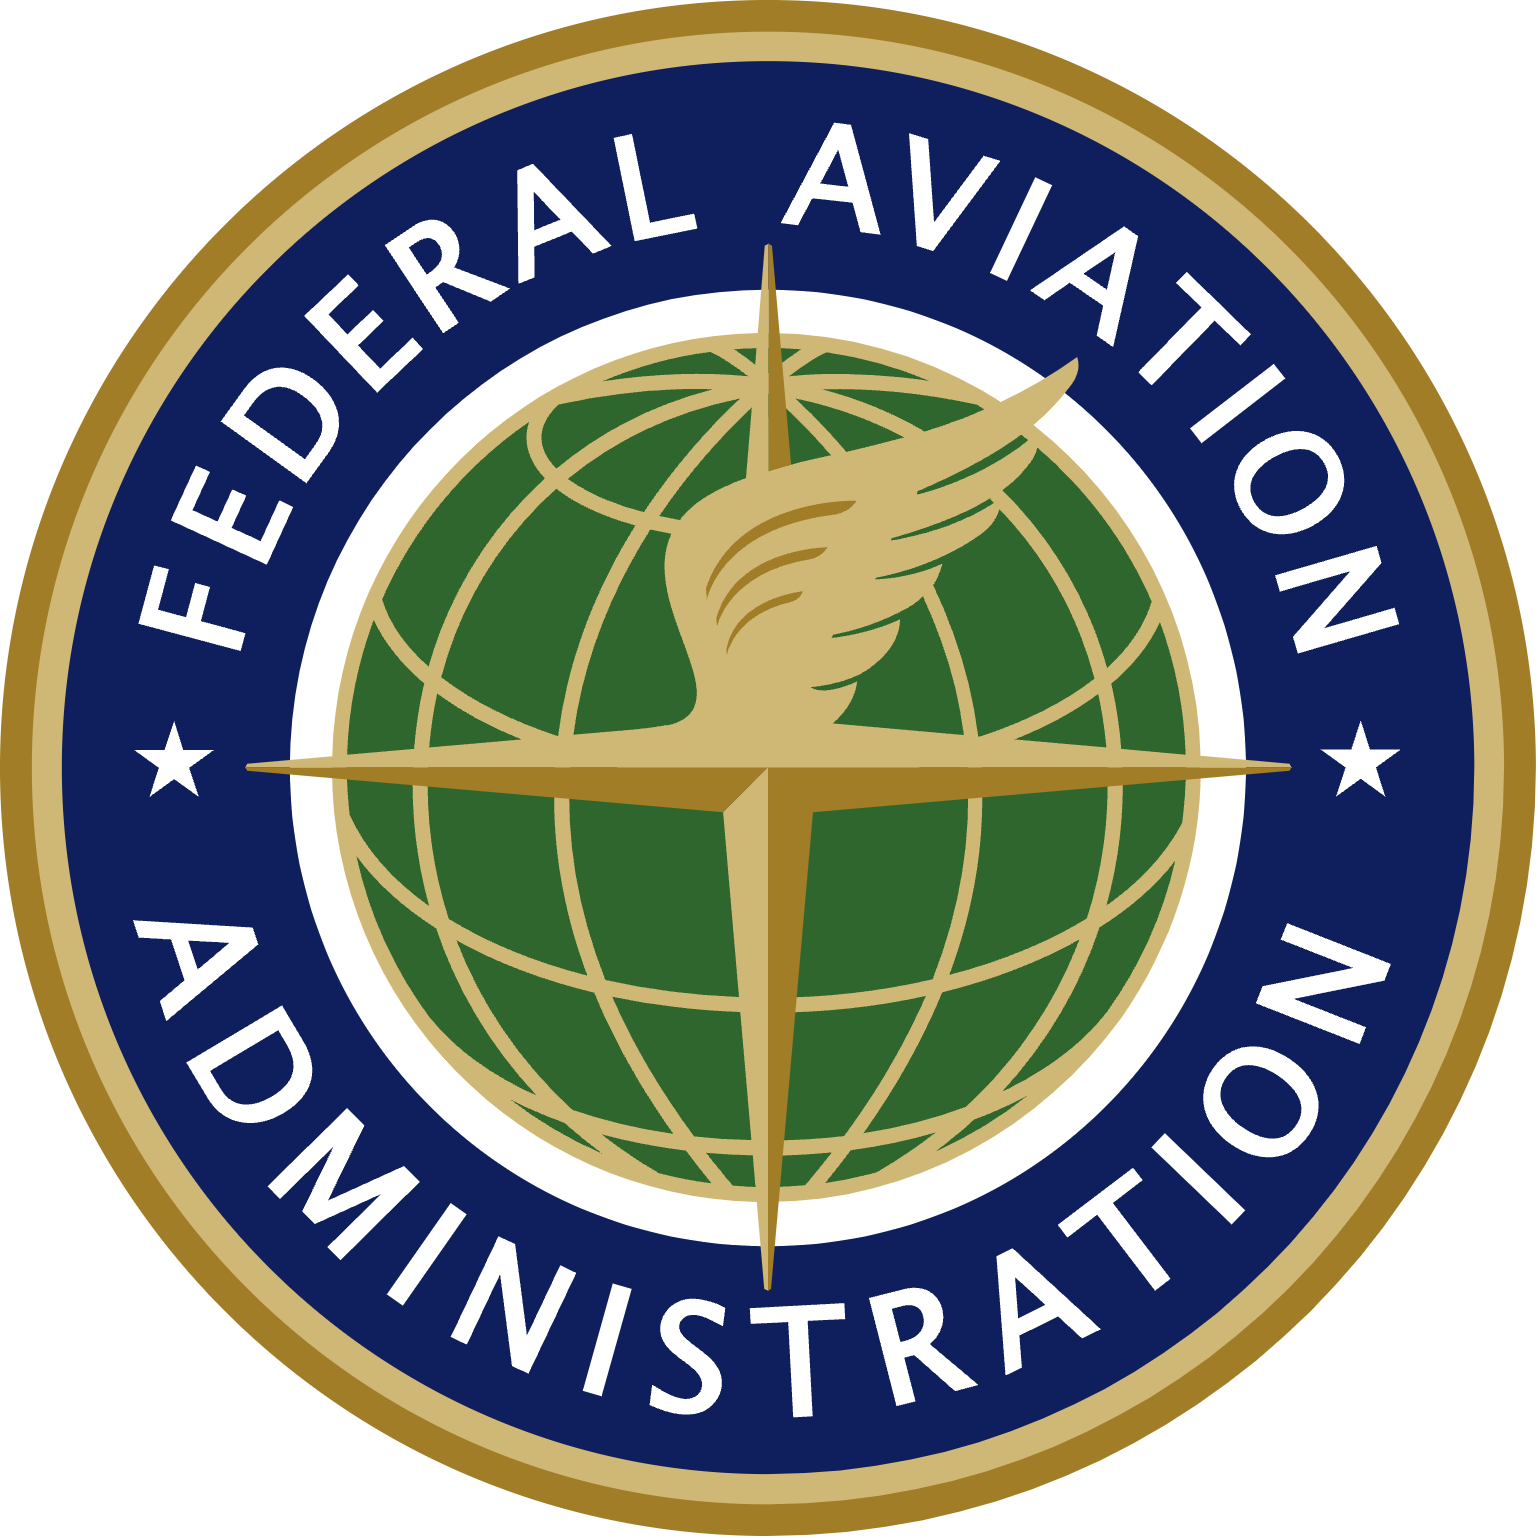 FAA highlights Verge Aero as a leader in drone light show technology.